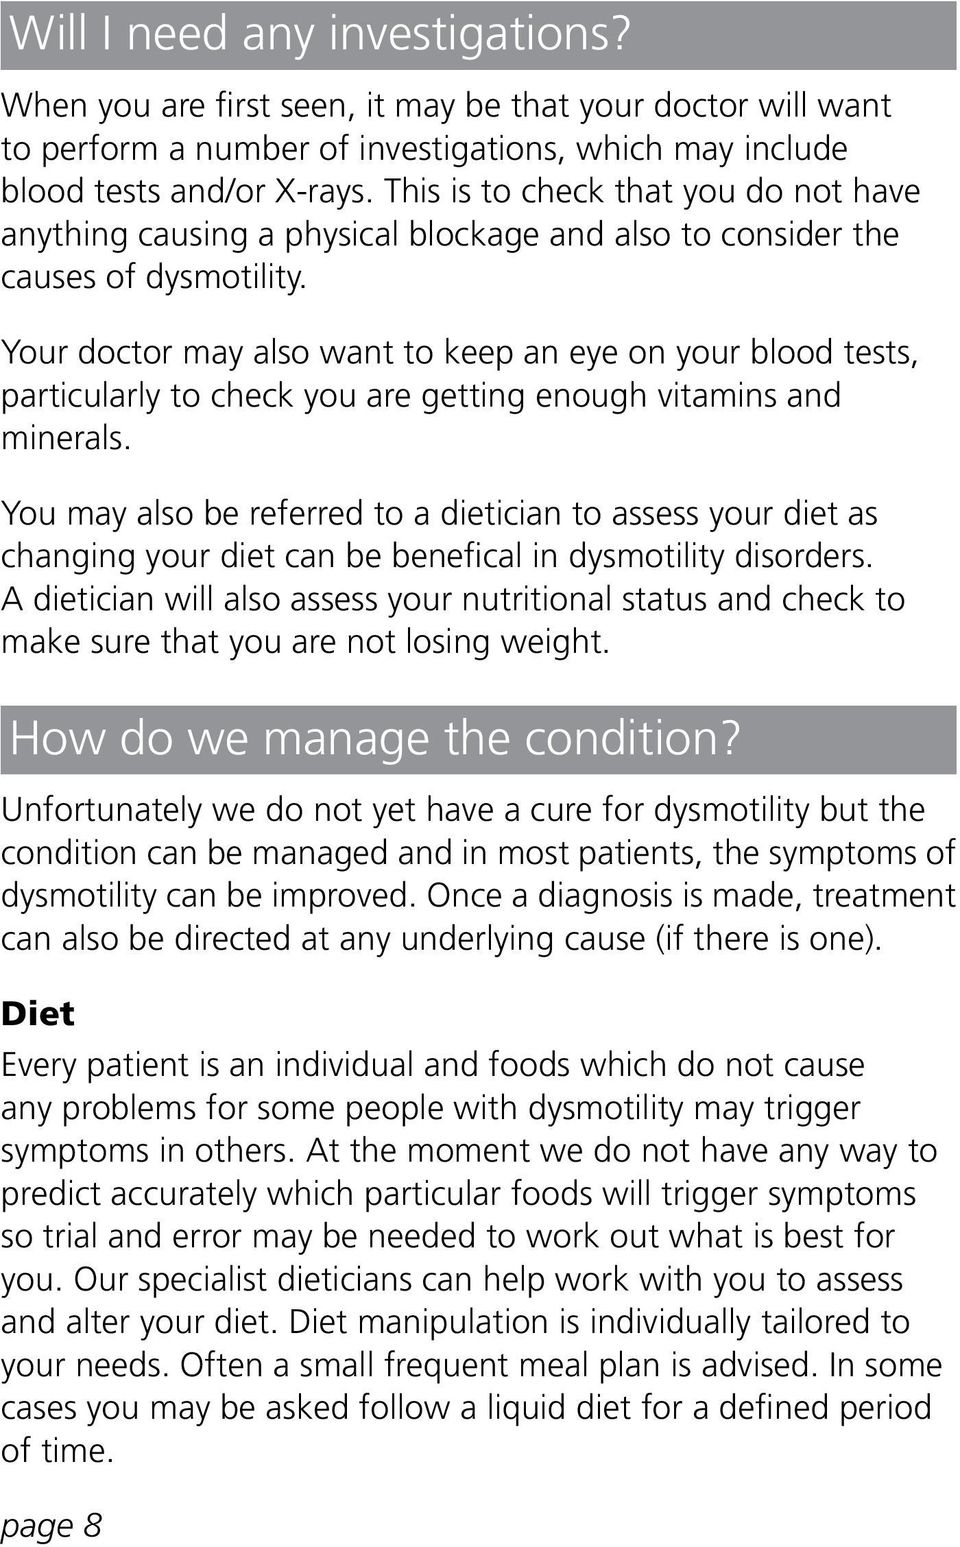 Your doctor may also want to keep an eye on your blood tests, particularly to check you are getting enough vitamins and minerals.